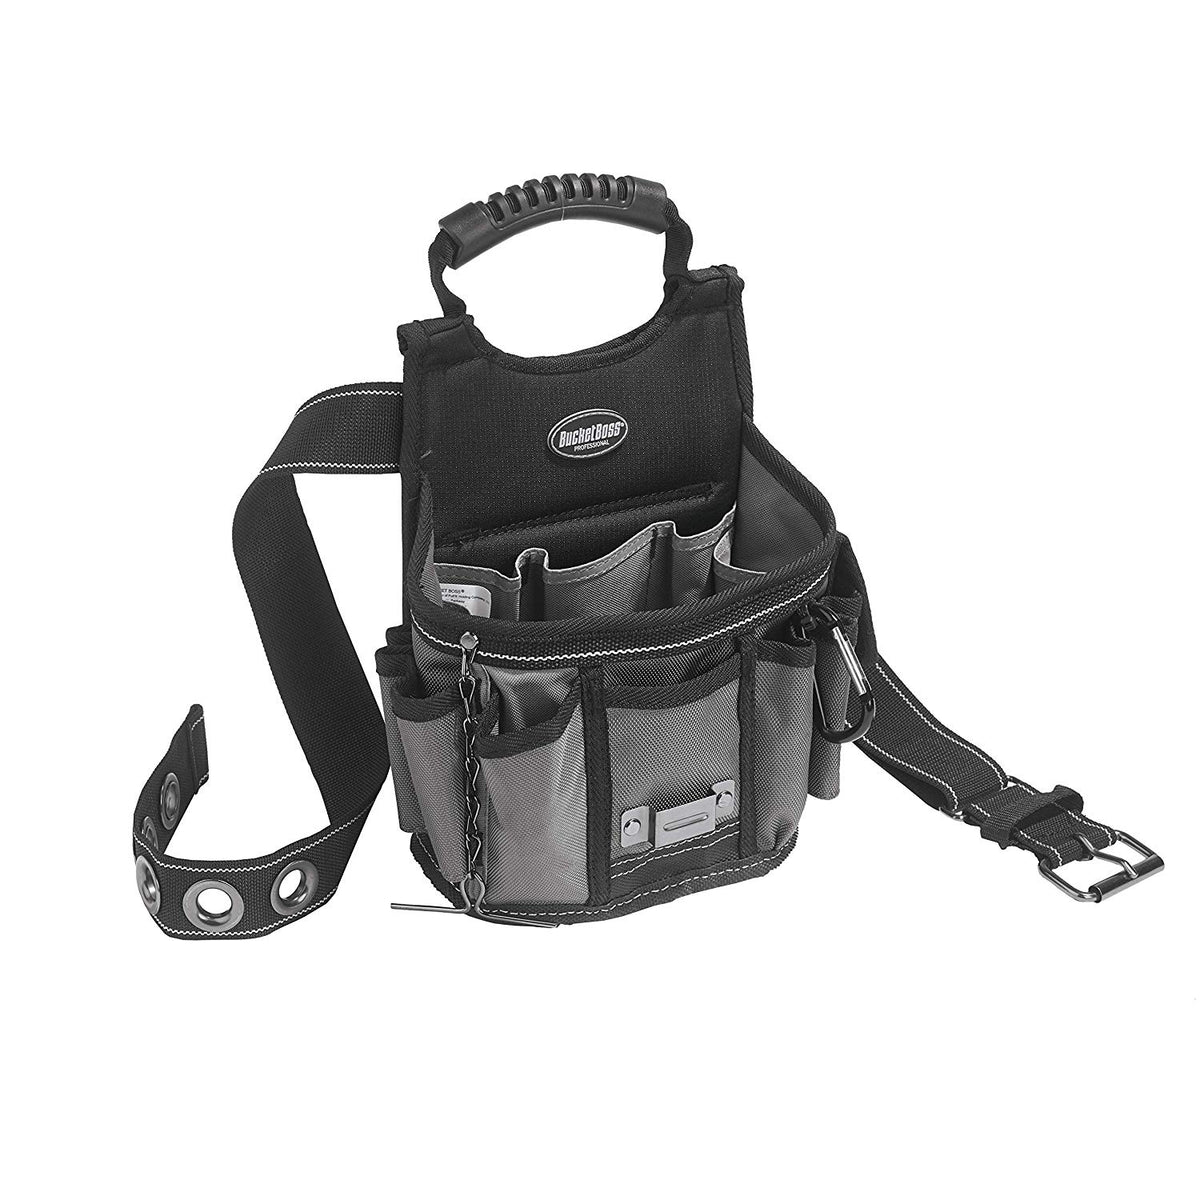 Bucket Boss 55300 Sparky Utility Pouch with 2" Web Belt, 17-Pockets